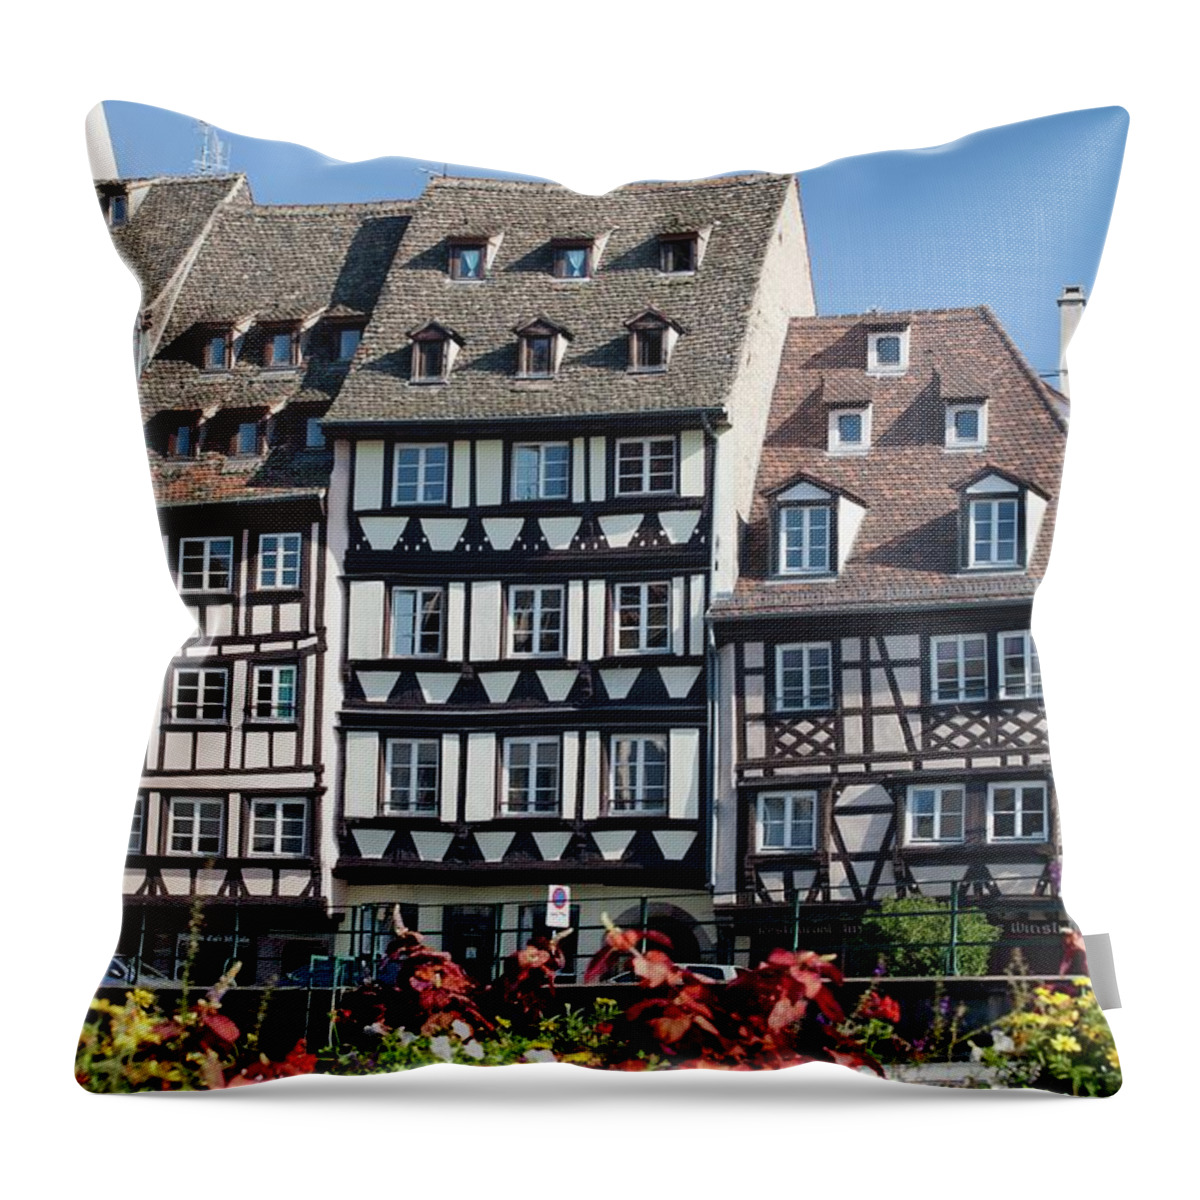 Apartment Throw Pillow featuring the photograph Medieval Timber Style Buildings With by Design Pics / Michael Interisano